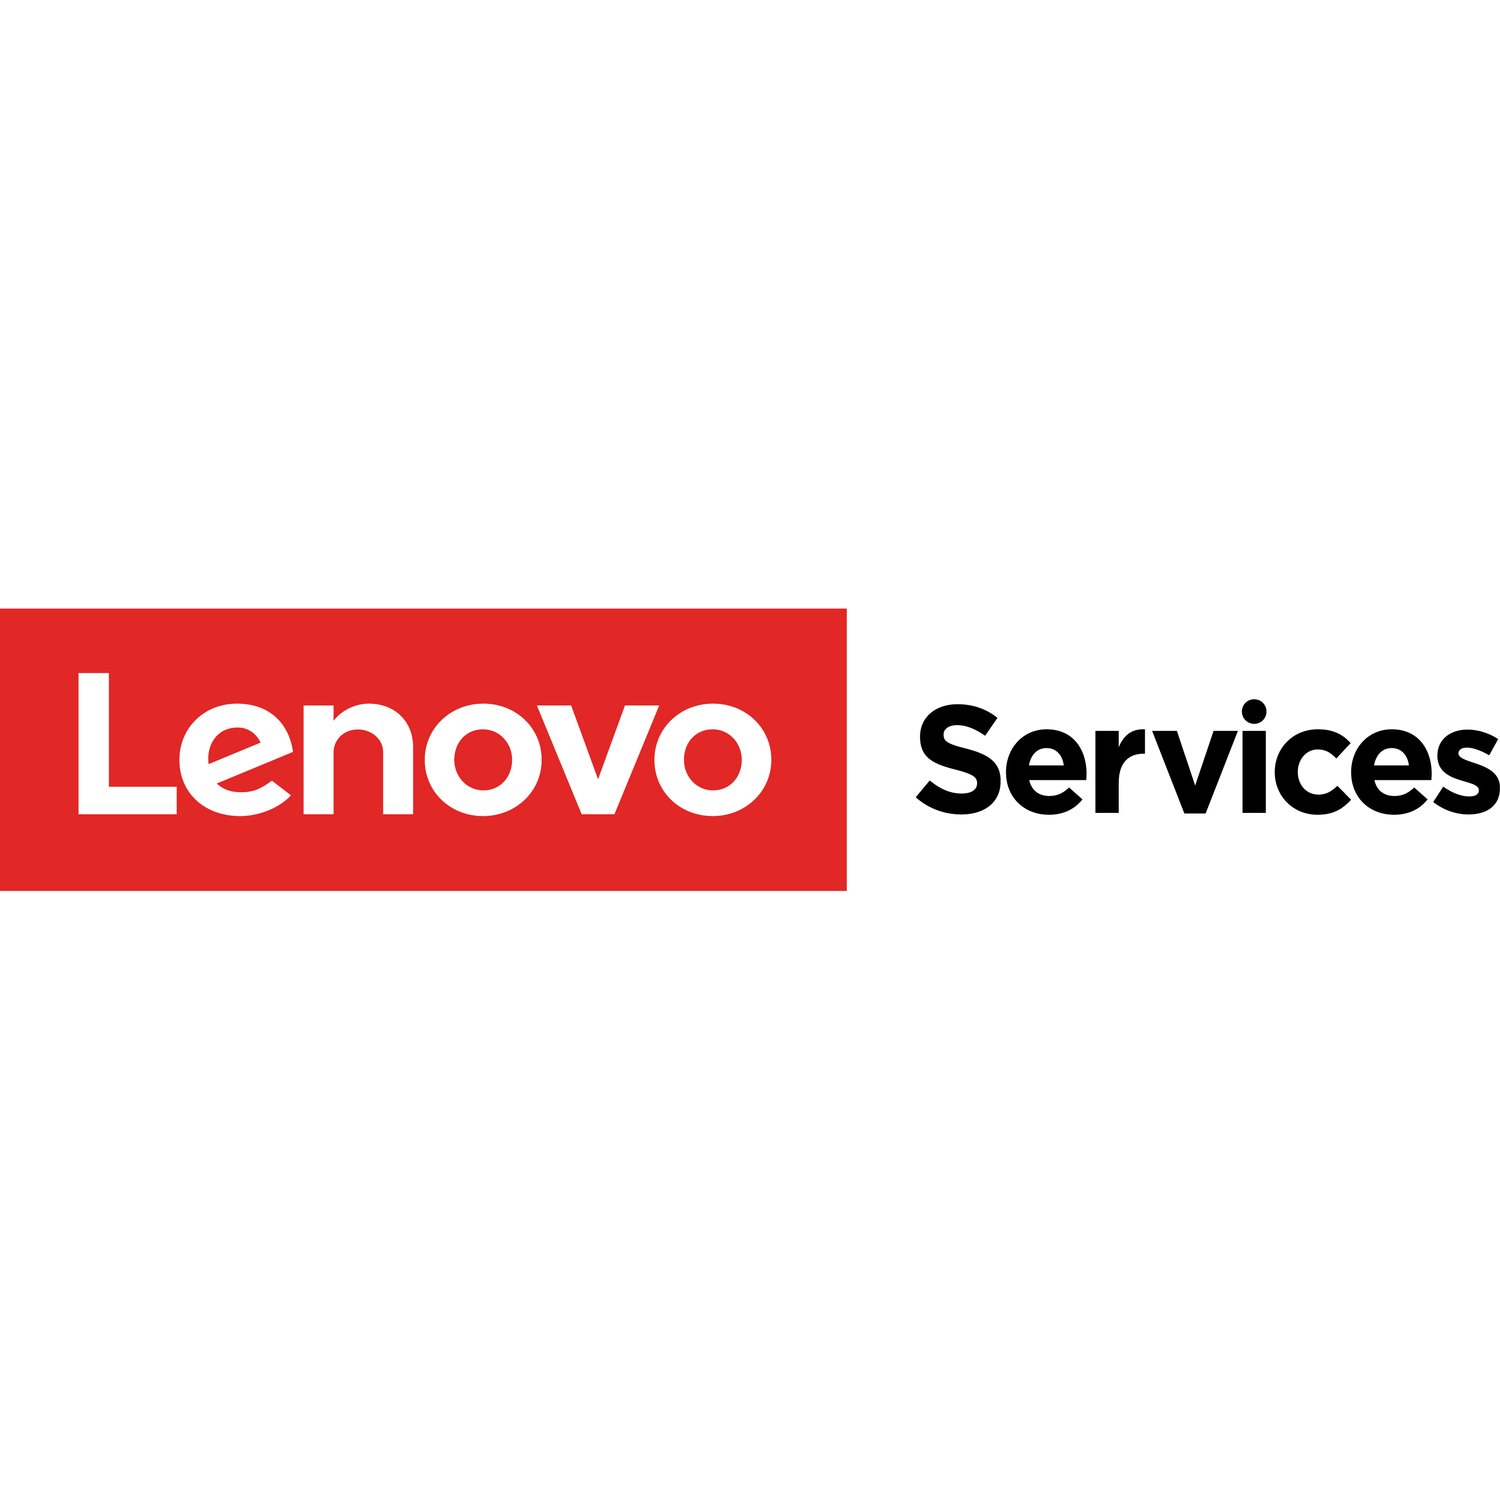 Lenovo International Services Entitlement - Extended Service - 5 Year - Service